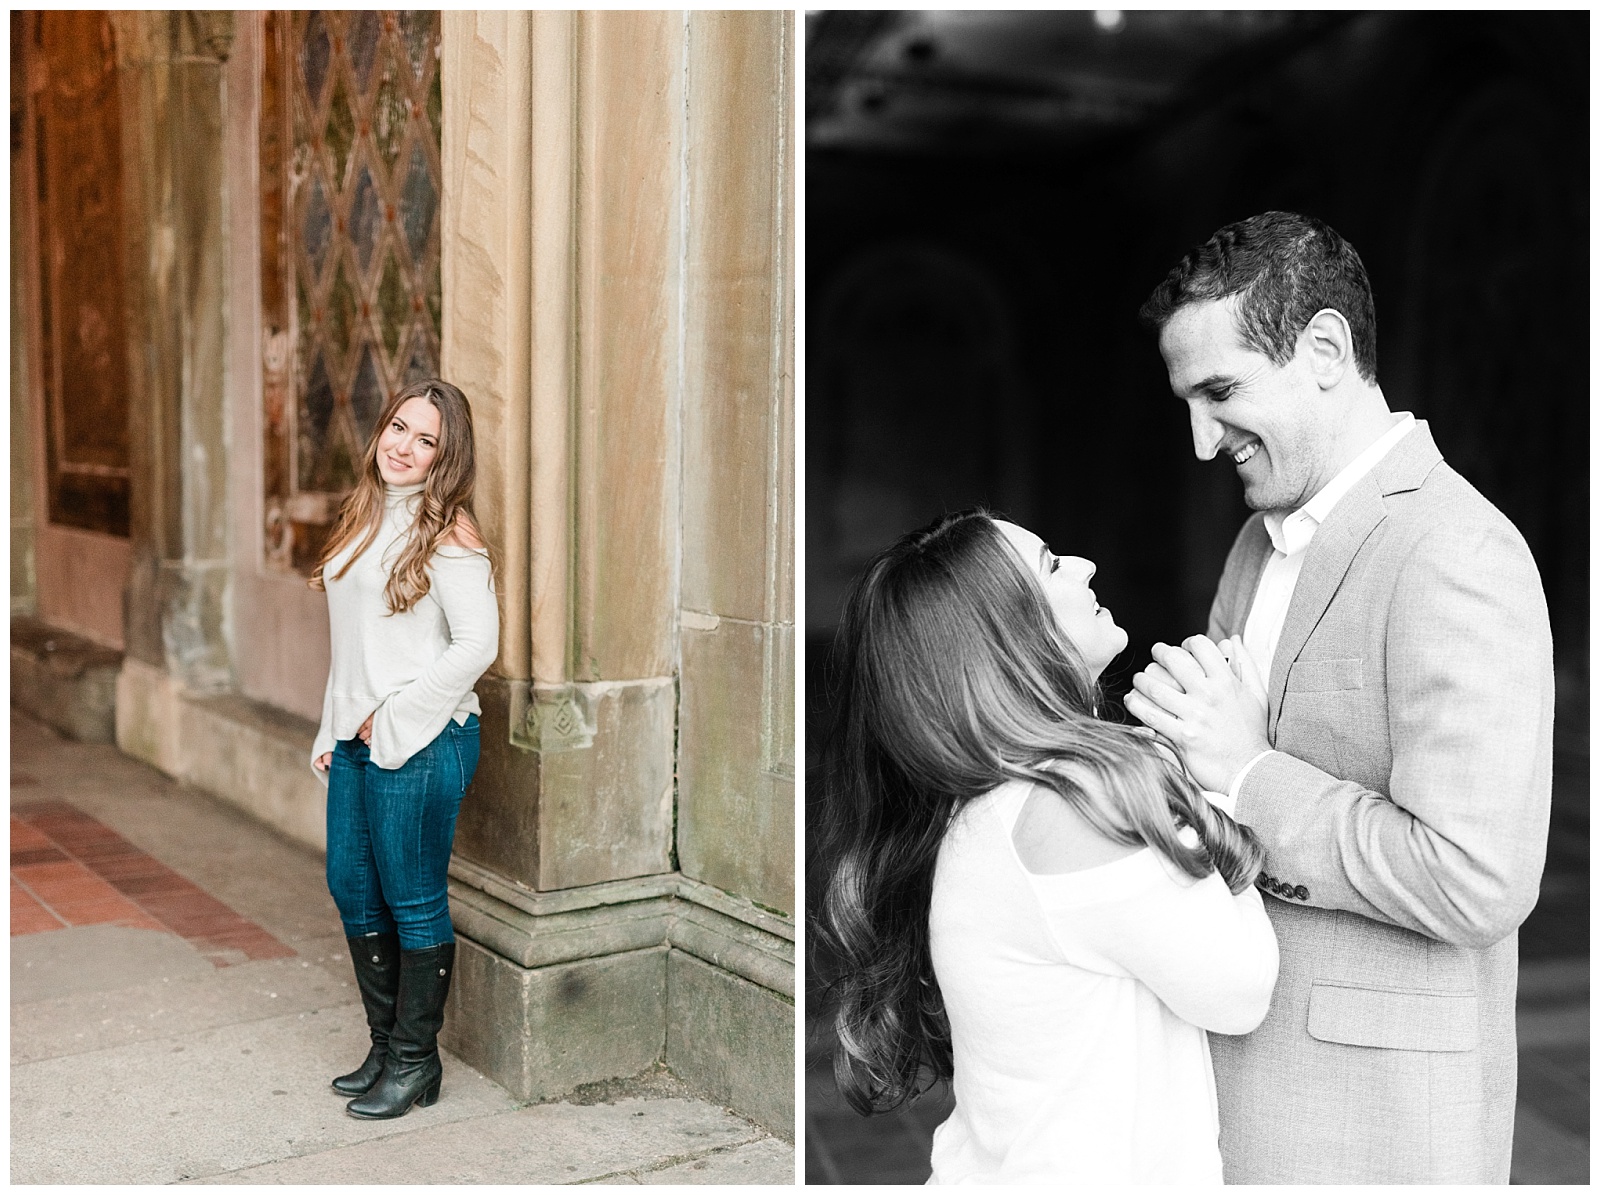 Bethesda Terrace,Central Park,City,Engagement Session,Fall,NYC,Nature,New York,Wedding Photographer,